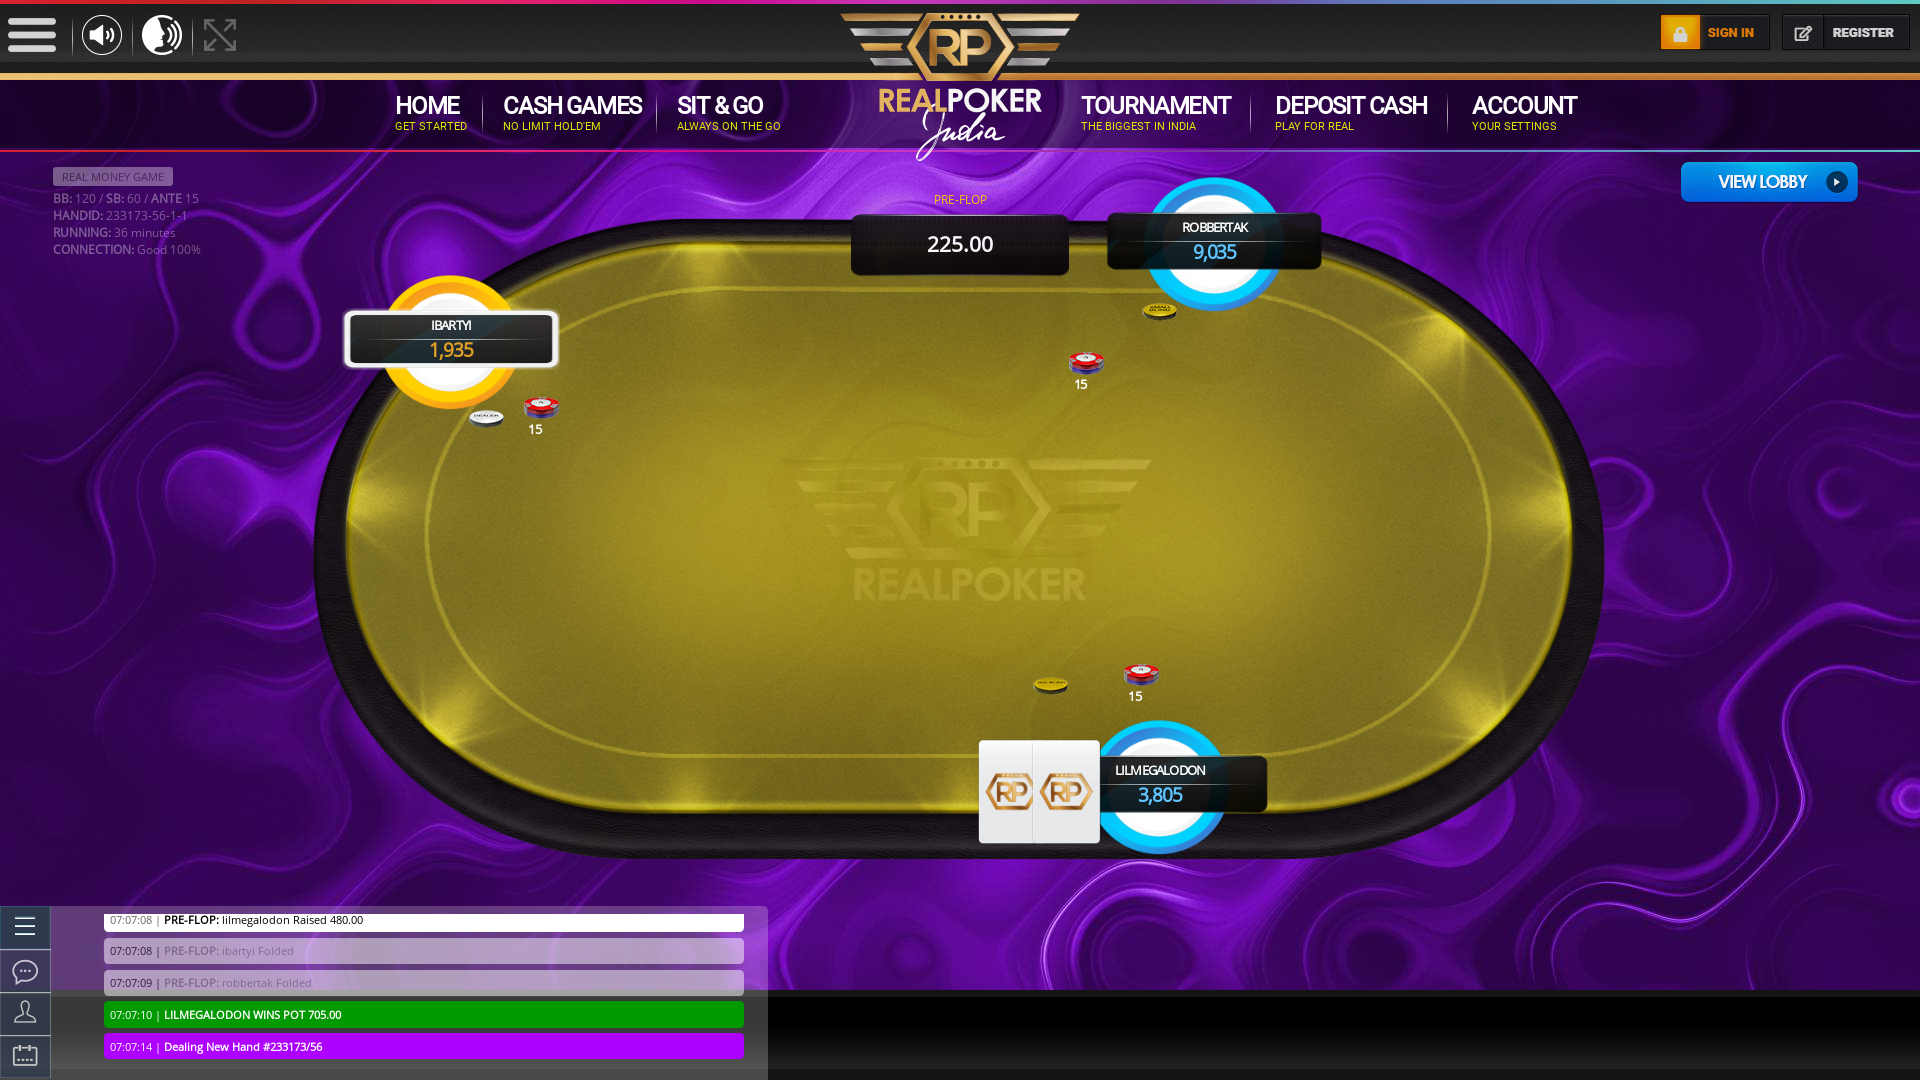 Indian poker on a 10 player table in the 36th minute